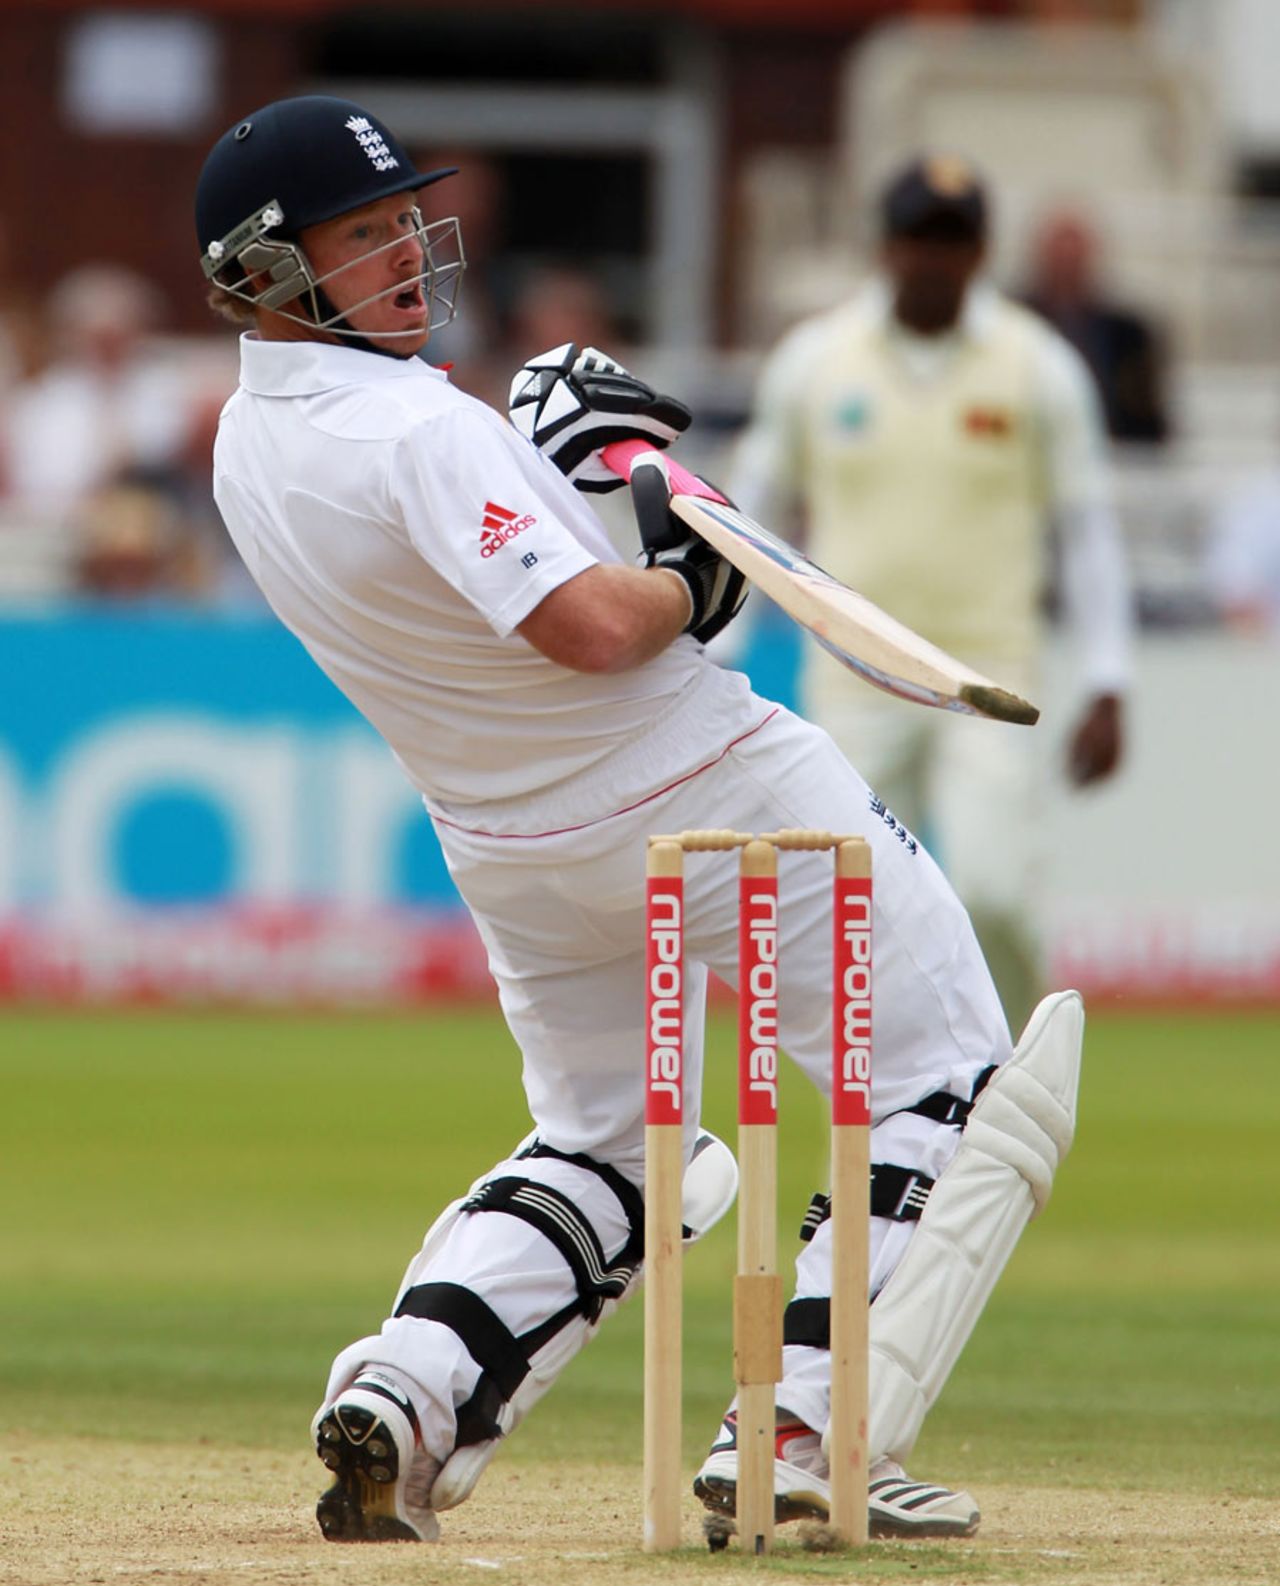 Ian Bell gets a boundary as he looks to avoid a bouncer, England v Sri Lanka, 2nd Test, Lord's, 5th day, June 7, 2011